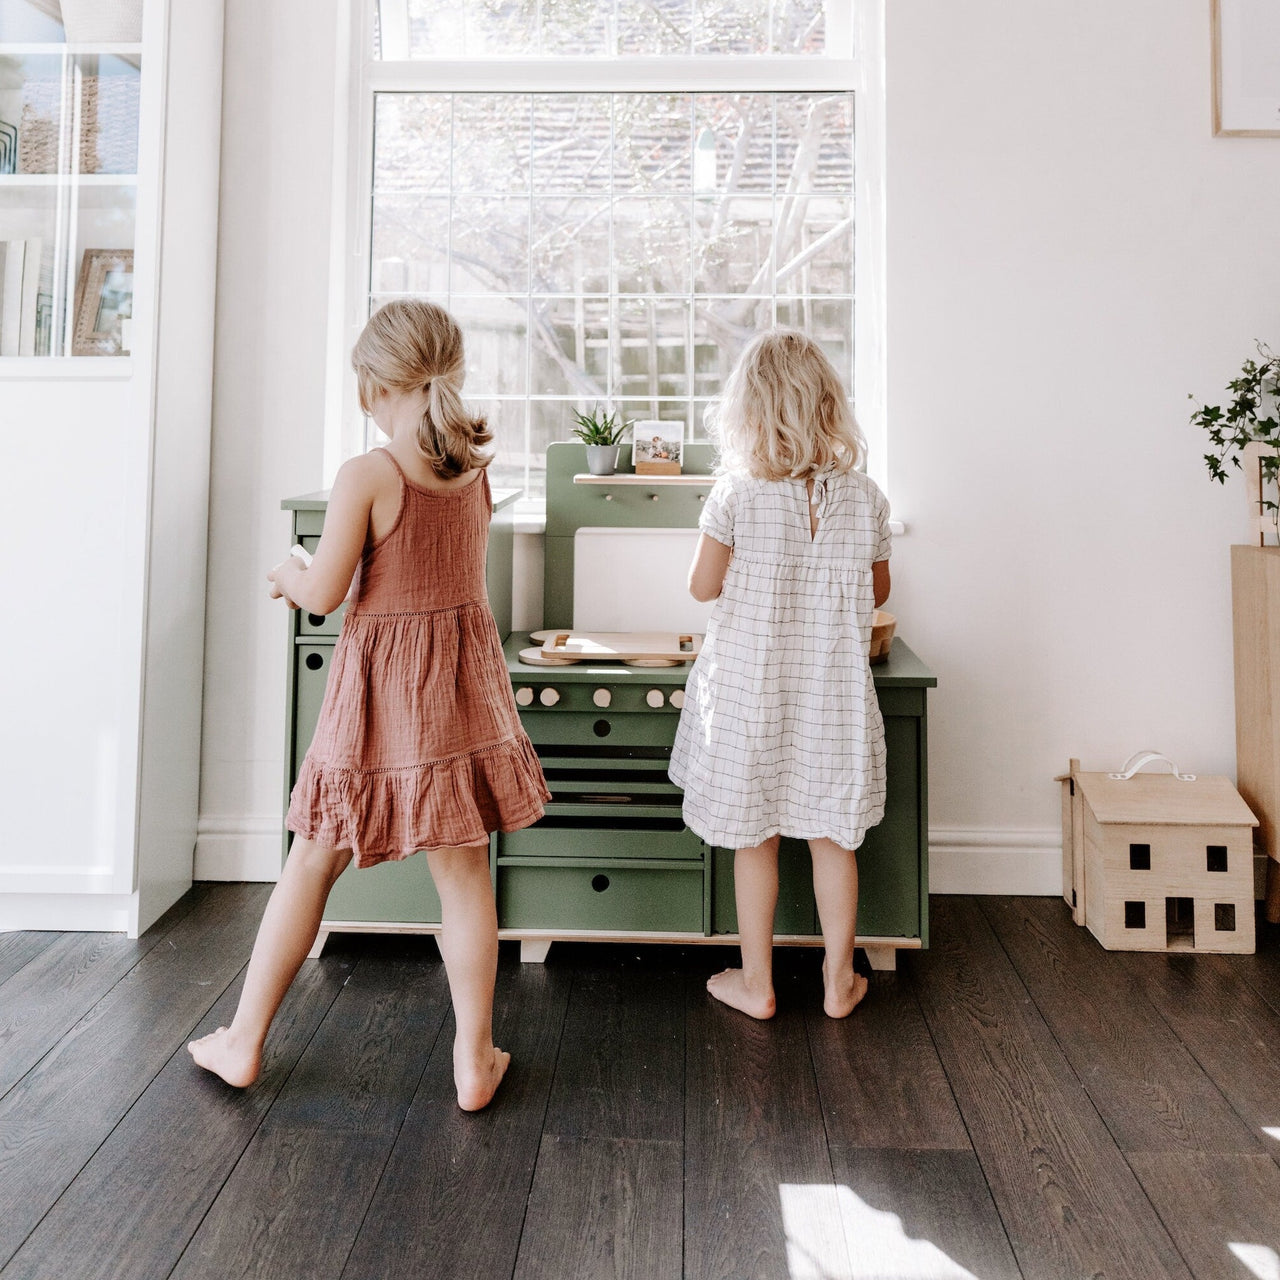 Dusty Green Wooden Play Kitchen